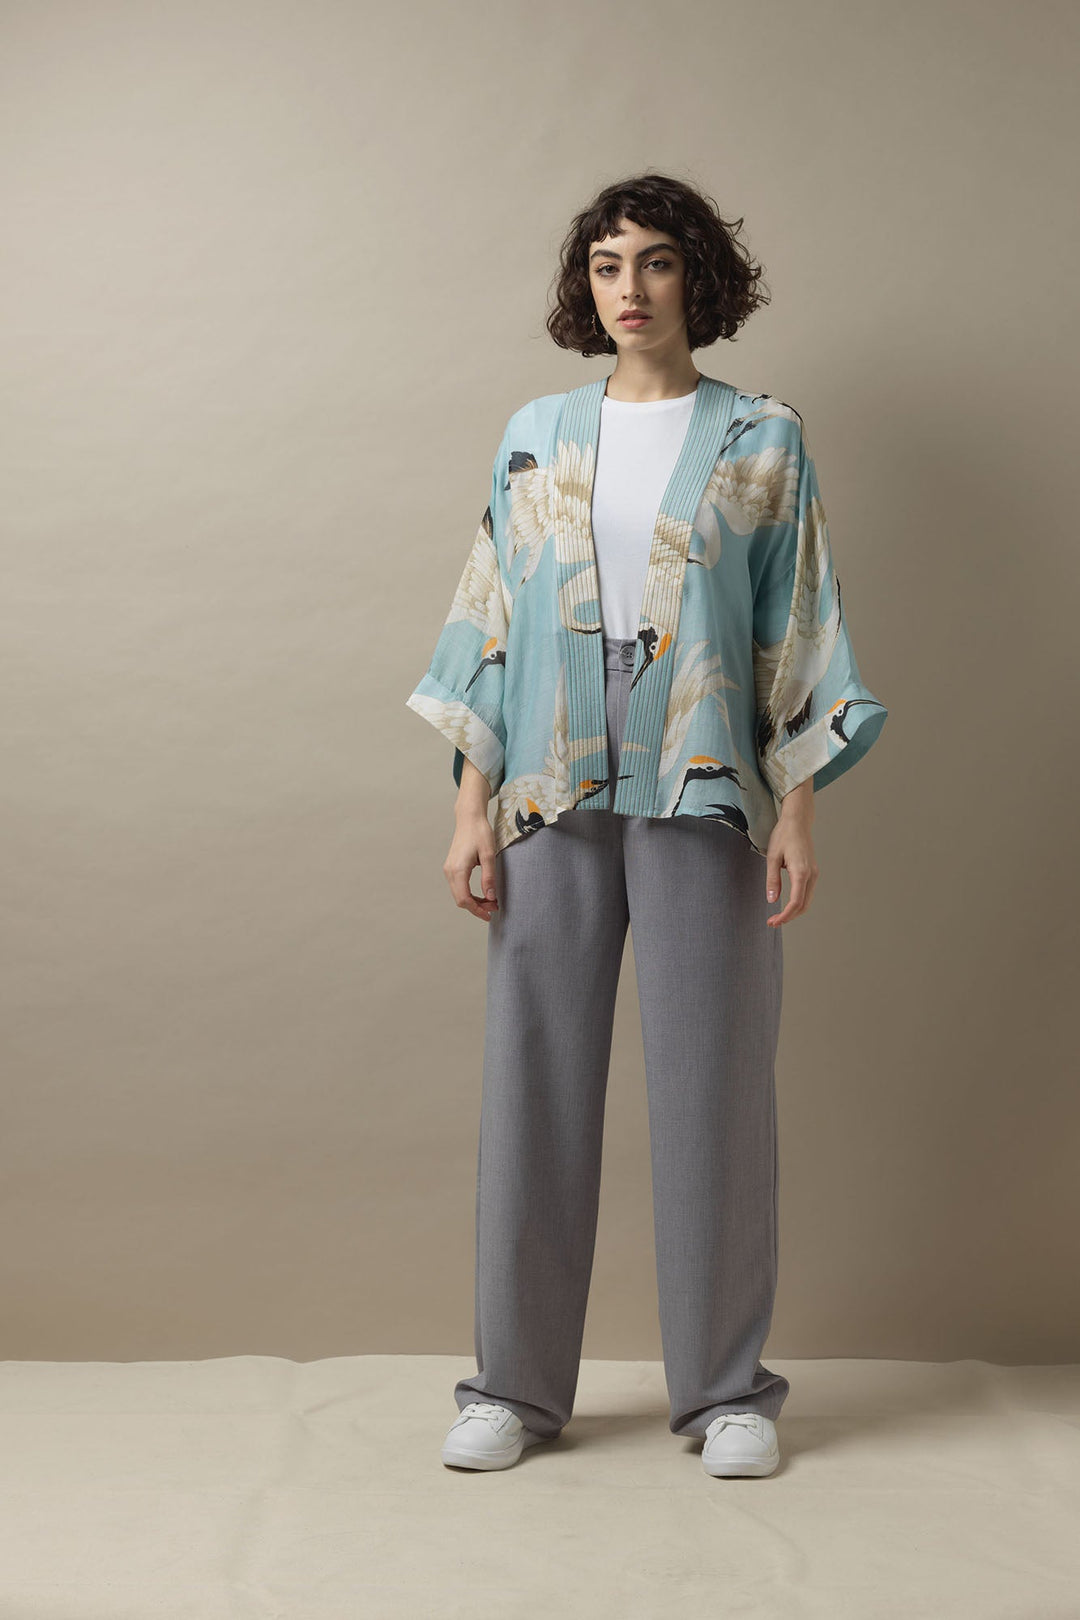 One Hundred Stars Stork Crane Sky Blue Short Mini Kimono can be styled with a white t-shirt and grey trousers for a relaxed but chic look. 